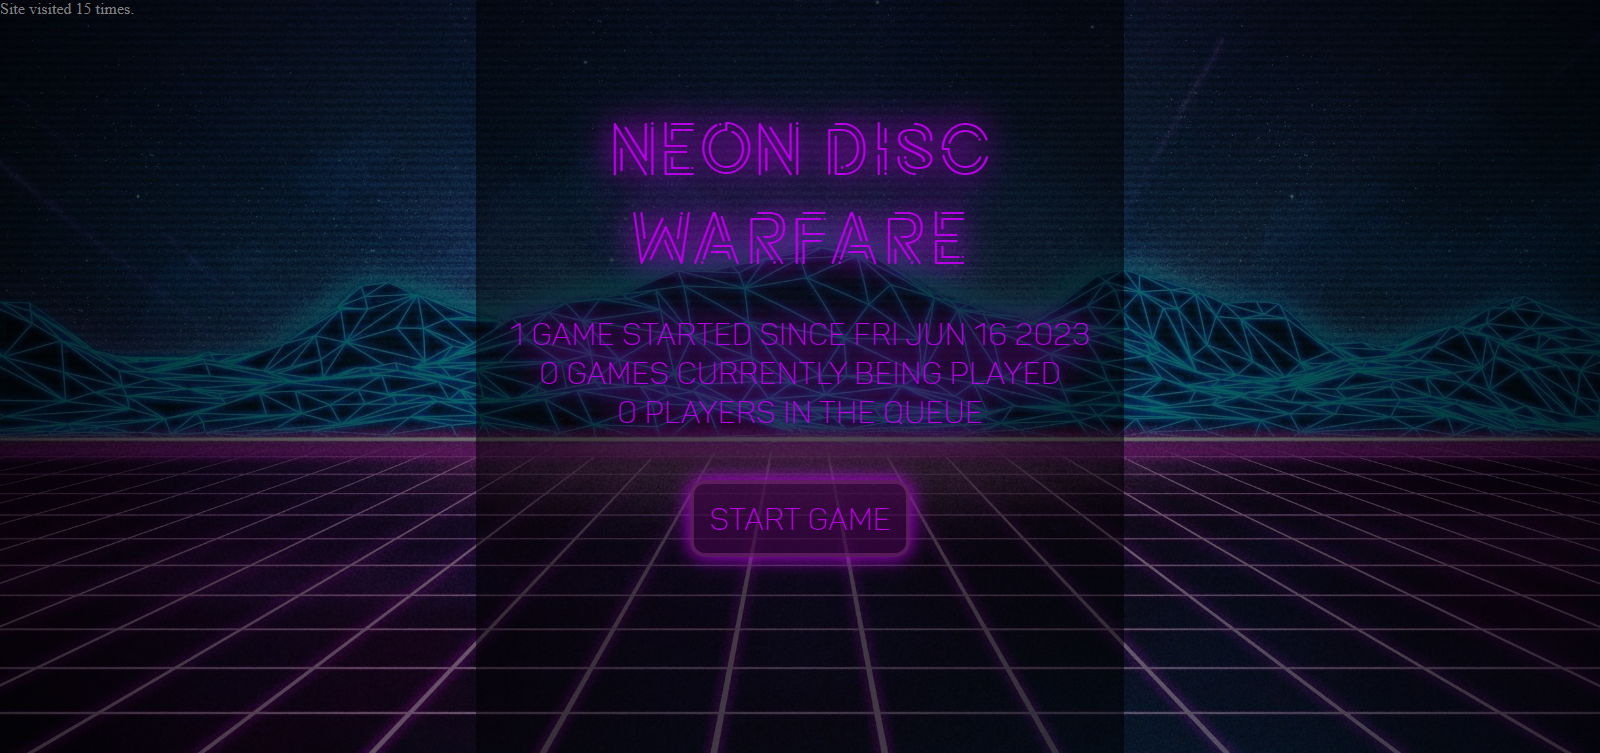 Splashscreen of the Neon Disc Warfare game, showing the title of the game, some game metrics, and a &ldquo;start game&rdquo; button